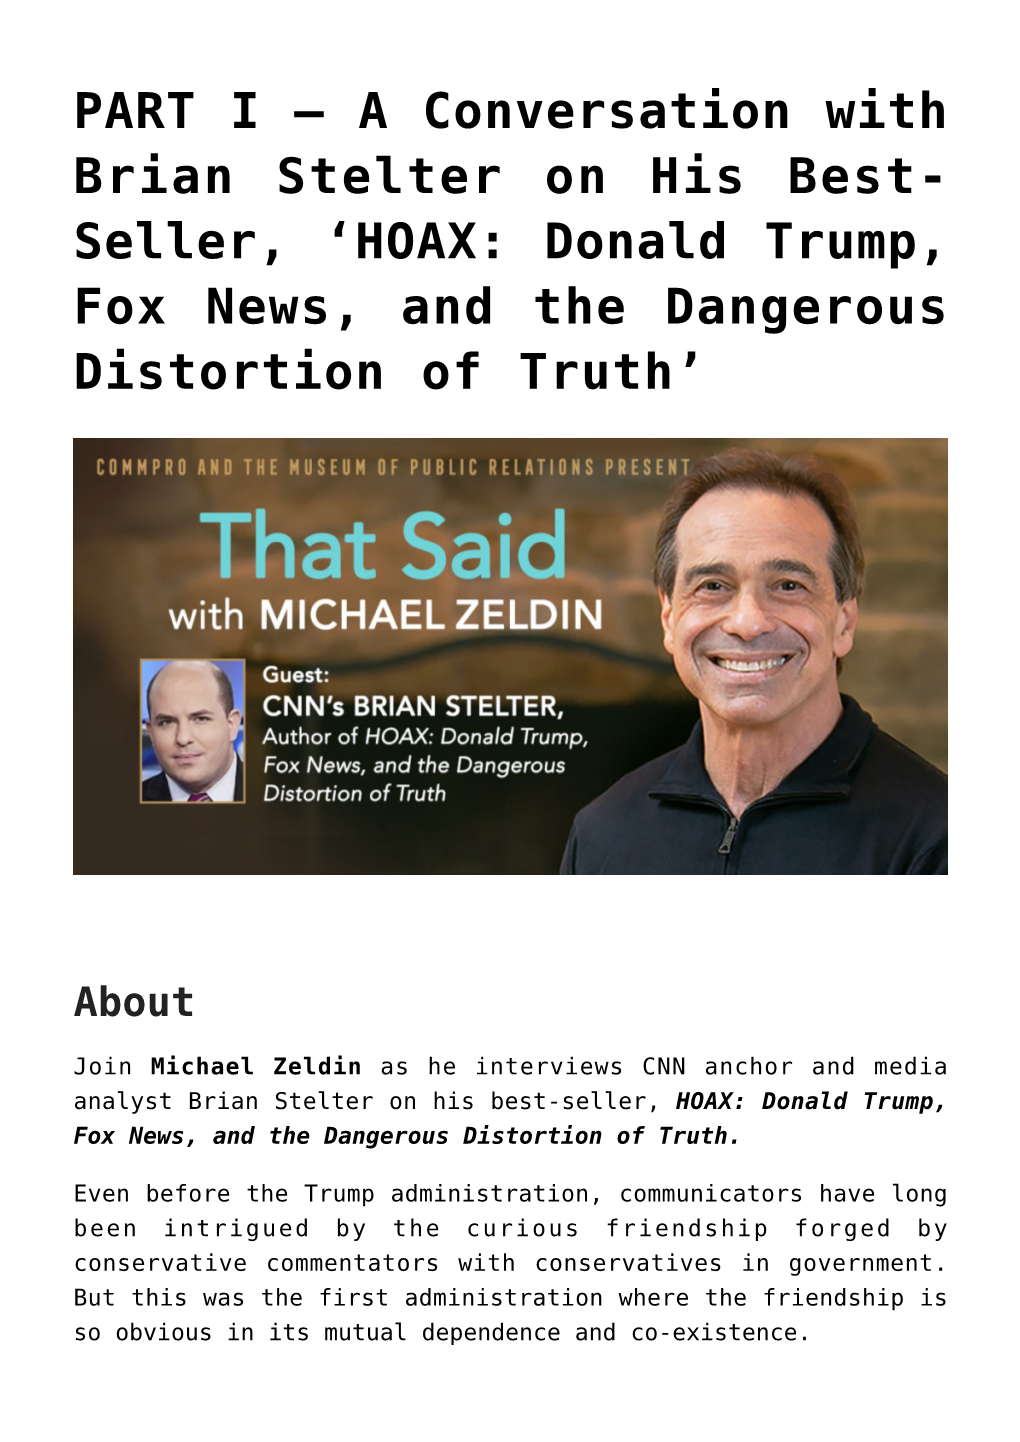 PART I &#8211; a Conversation with Brian Stelter on His